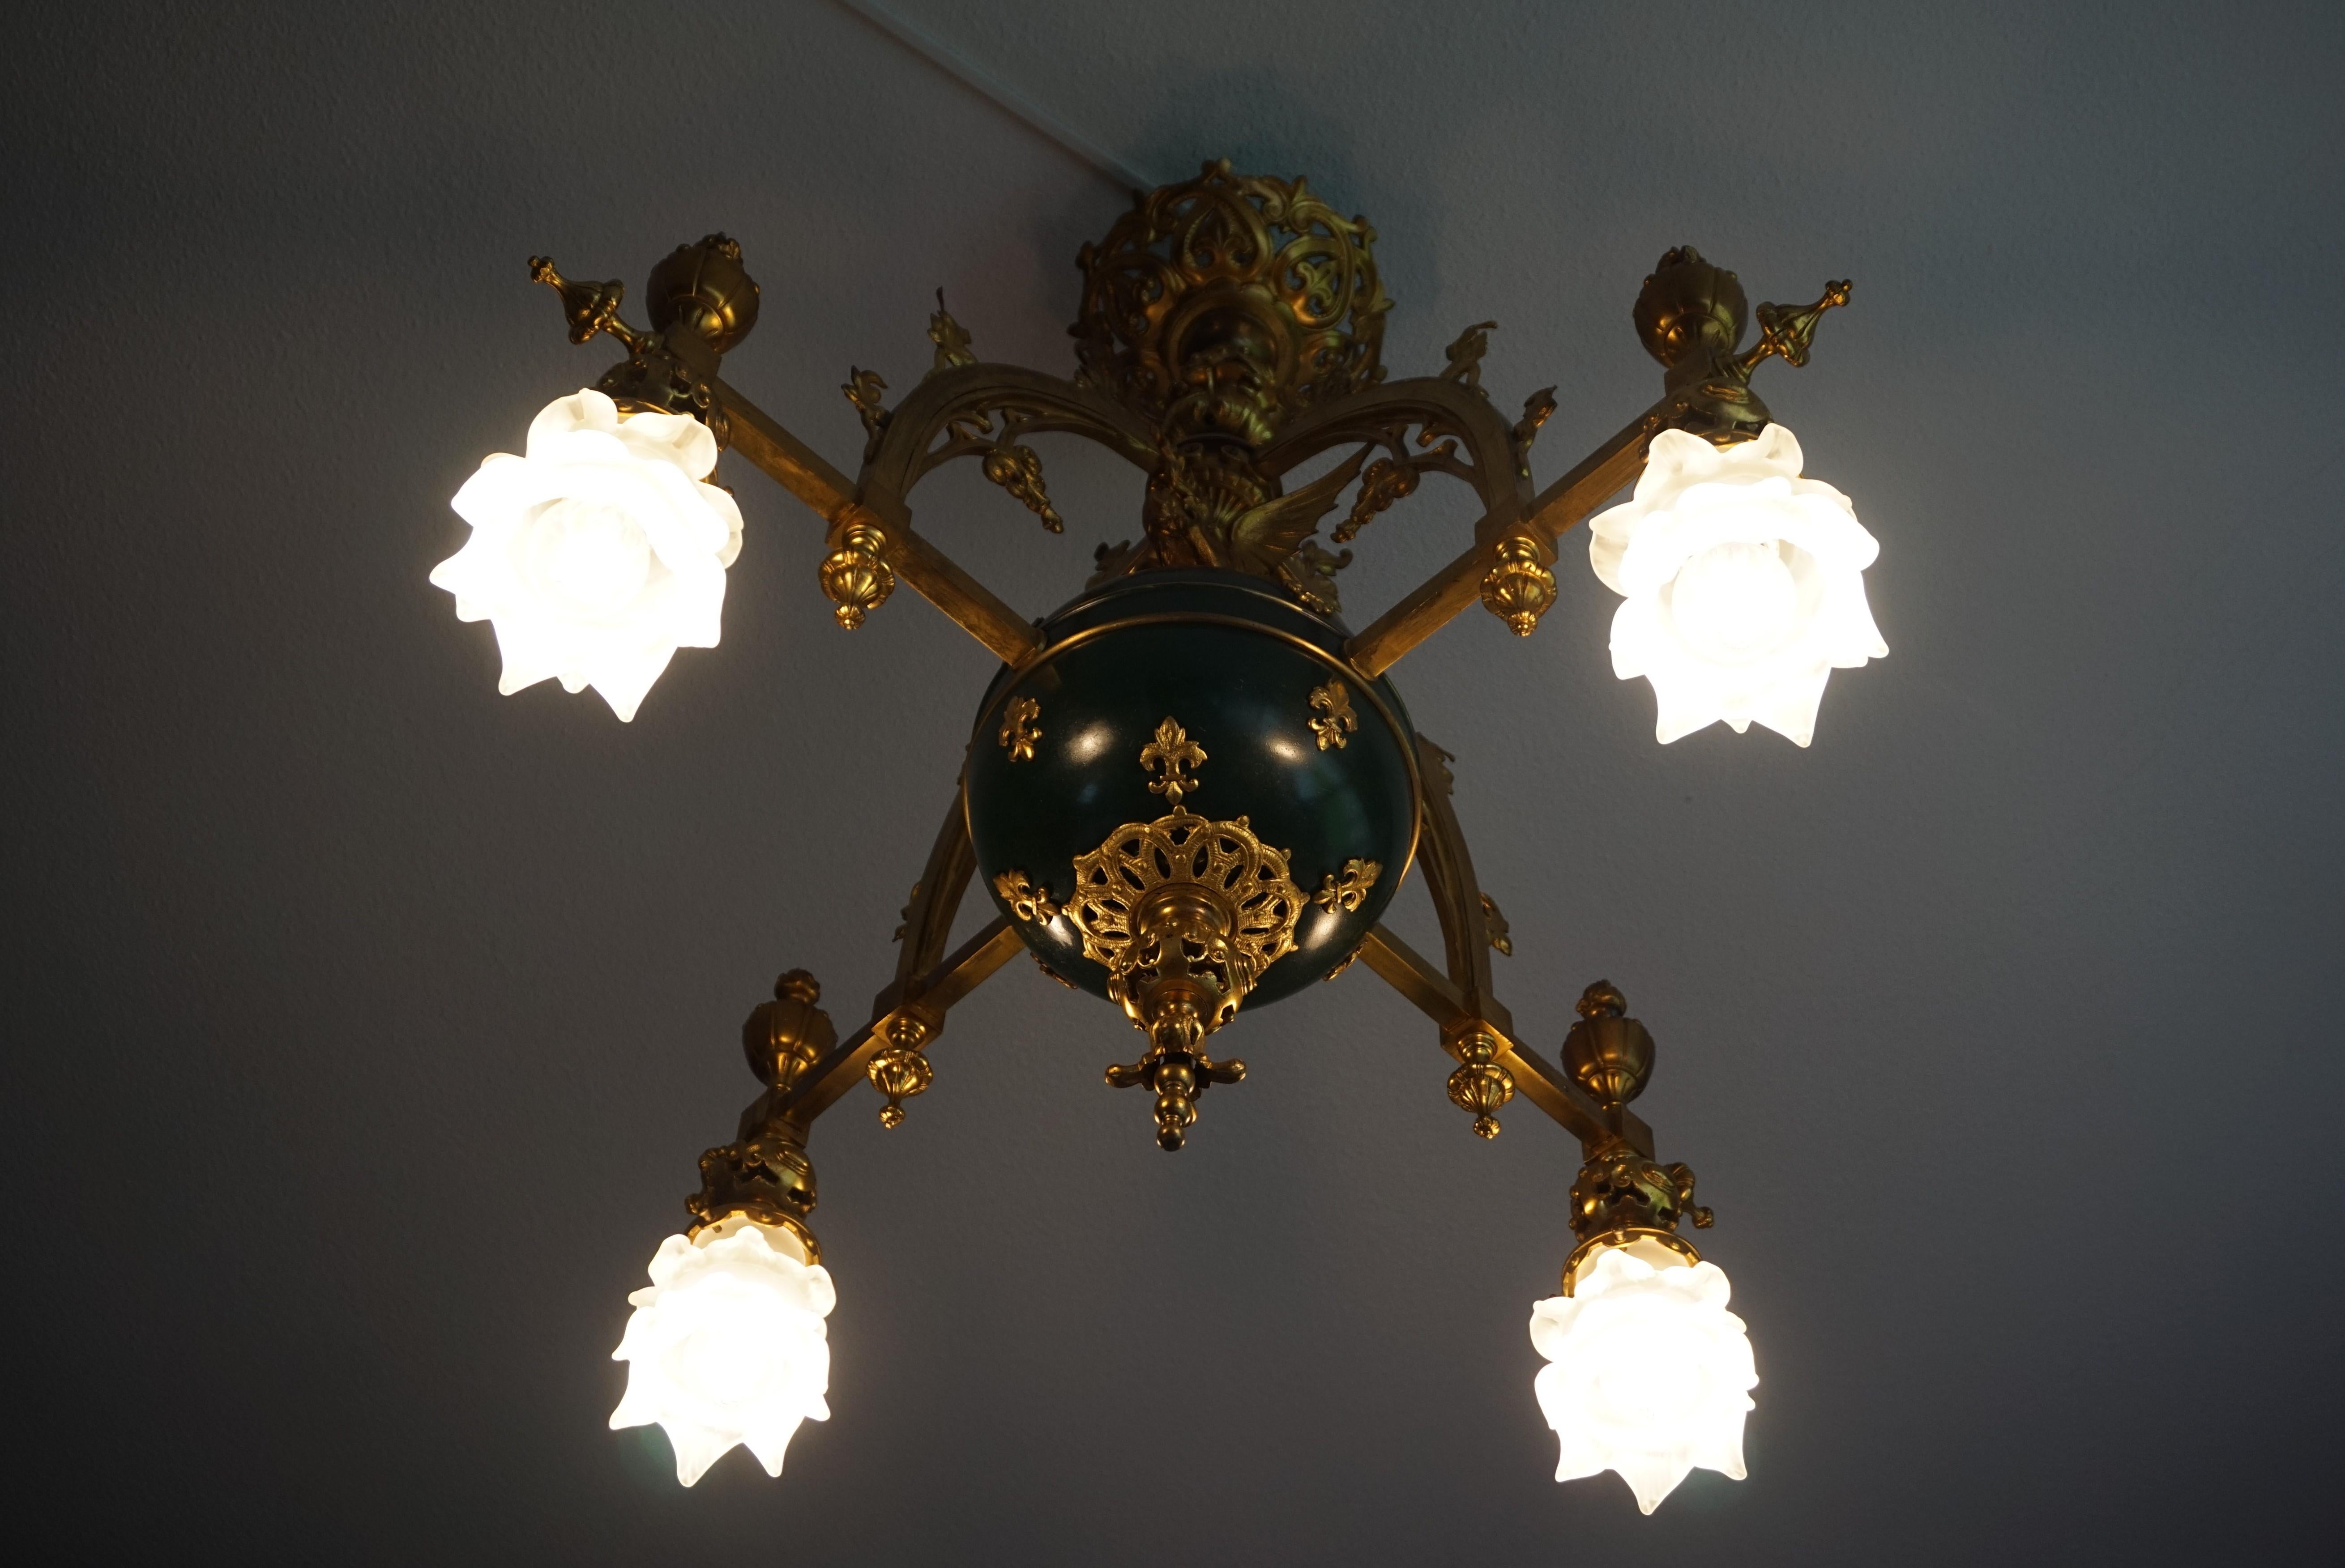 Stunning Gilt Bronze Gothic Revival Chandelier w. Dragon Sculpture & Glass Shade For Sale 7